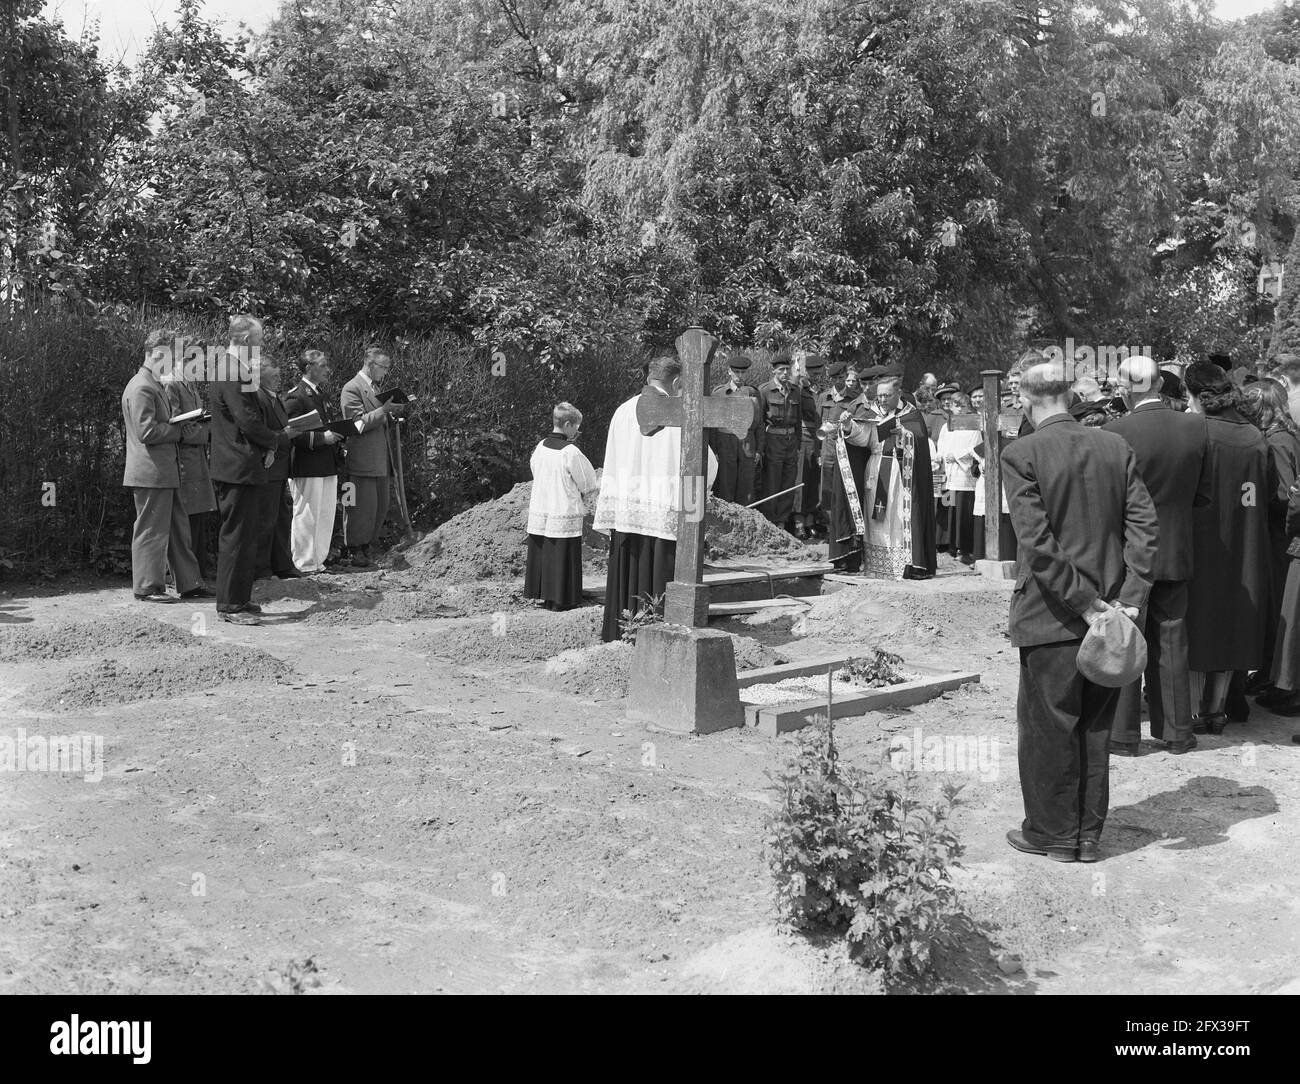 Military funeral at Spijk, June 18, 1956, funerals, military, The Netherlands, 20th century press agency photo, news to remember, documentary, historic photography 1945-1990, visual stories, human history of the Twentieth Century, capturing moments in time Stock Photo